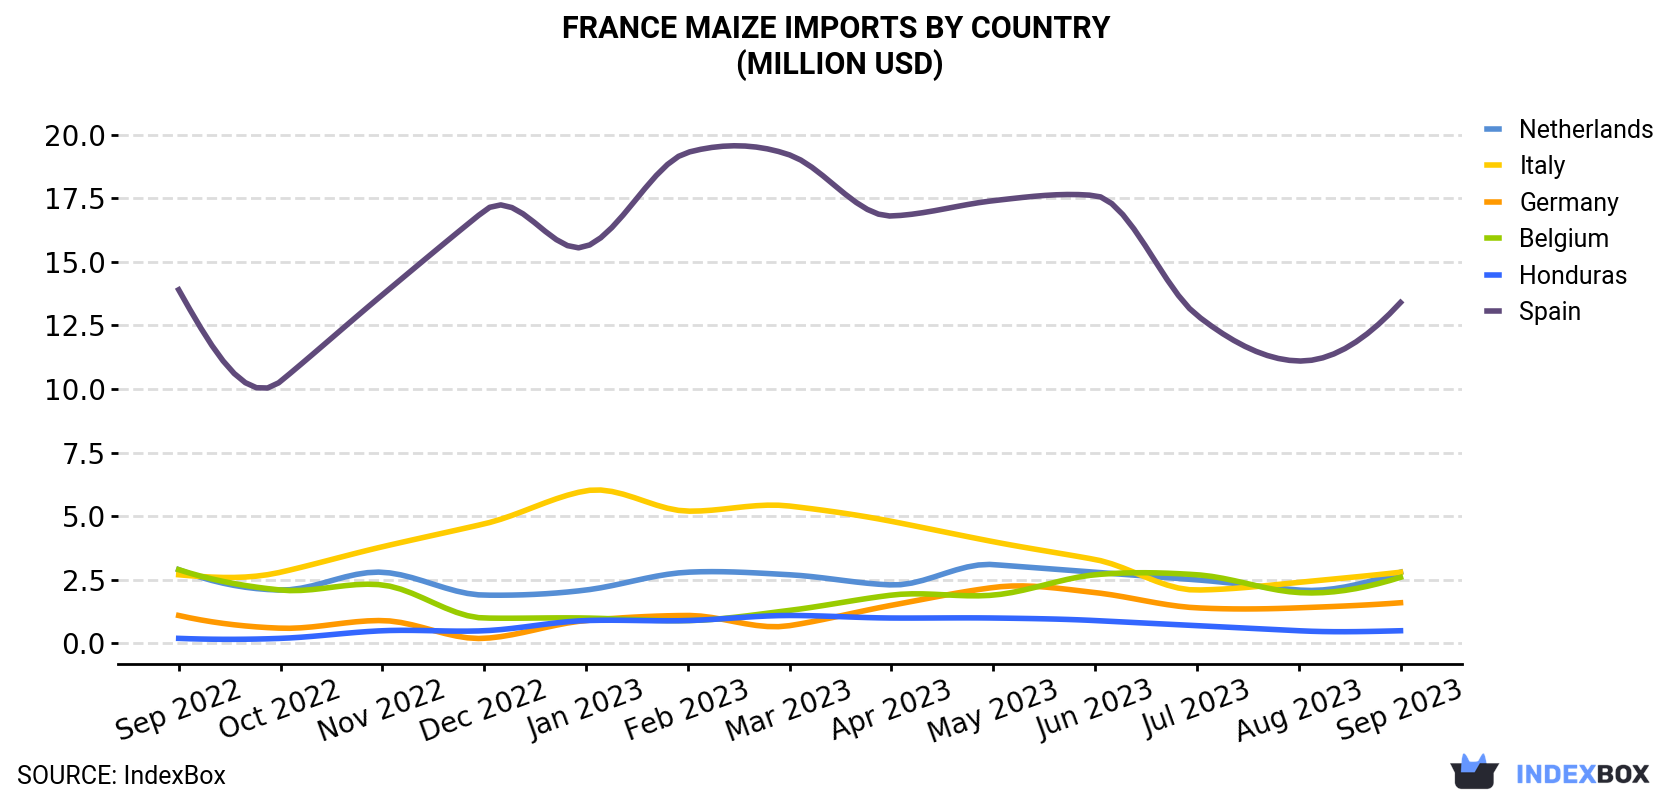 France Maize Imports By Country (Million USD)